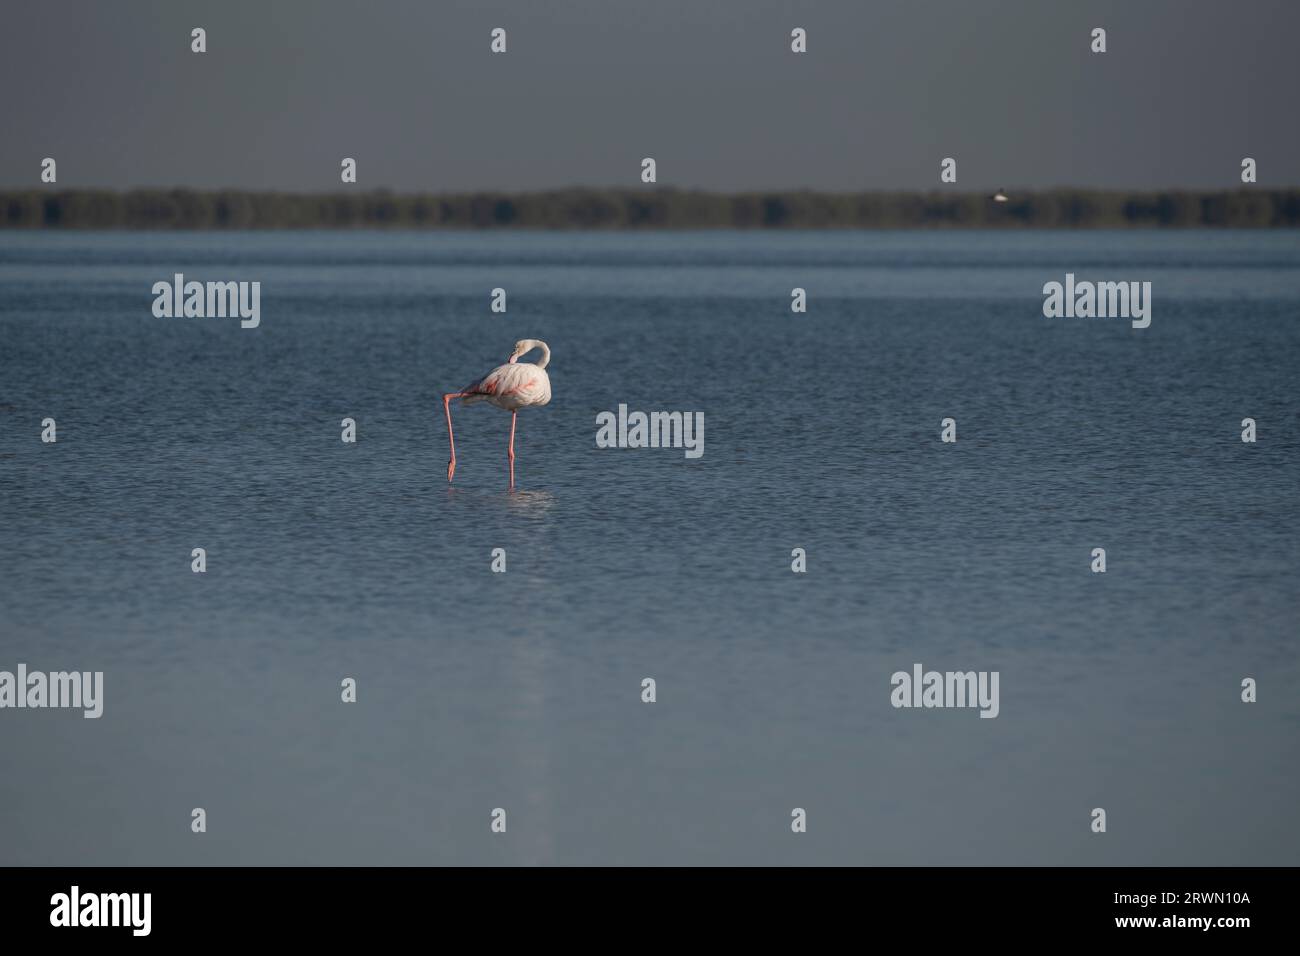 Flamingo wading through the picturesque mangroves of Umm Al Qwain, United Arab Emirates. Wildlife of the Middle East and the Arabian Peninsula Stock Photo